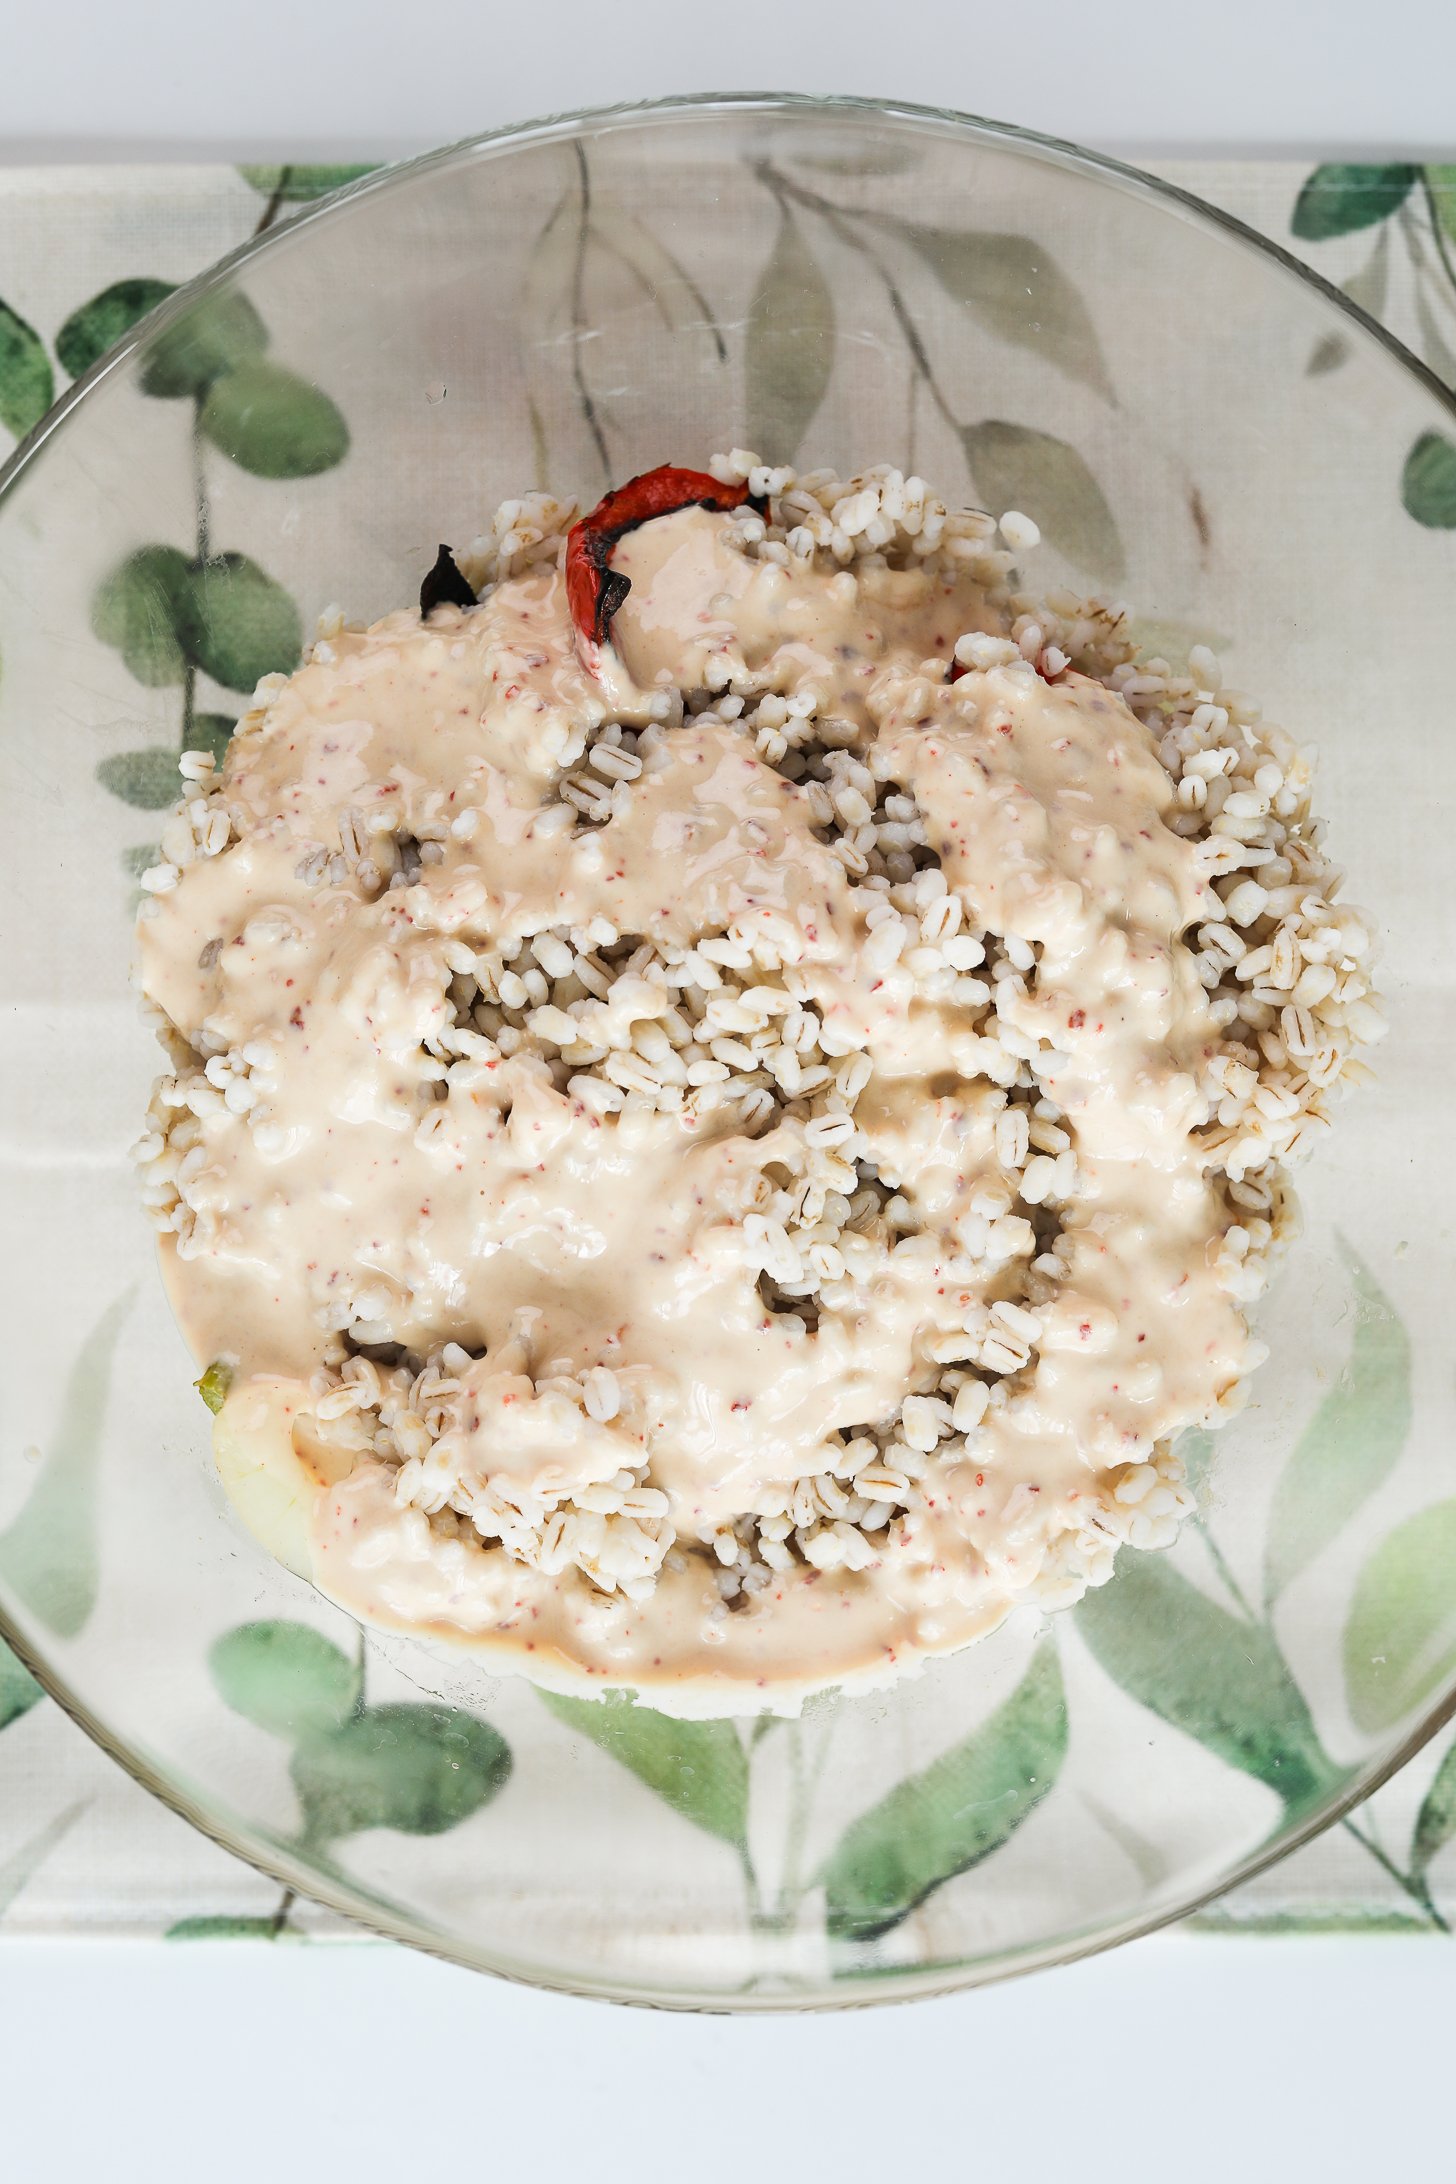 Top view of a bowl of cooked barley topped with a white creamy tahini dressing.